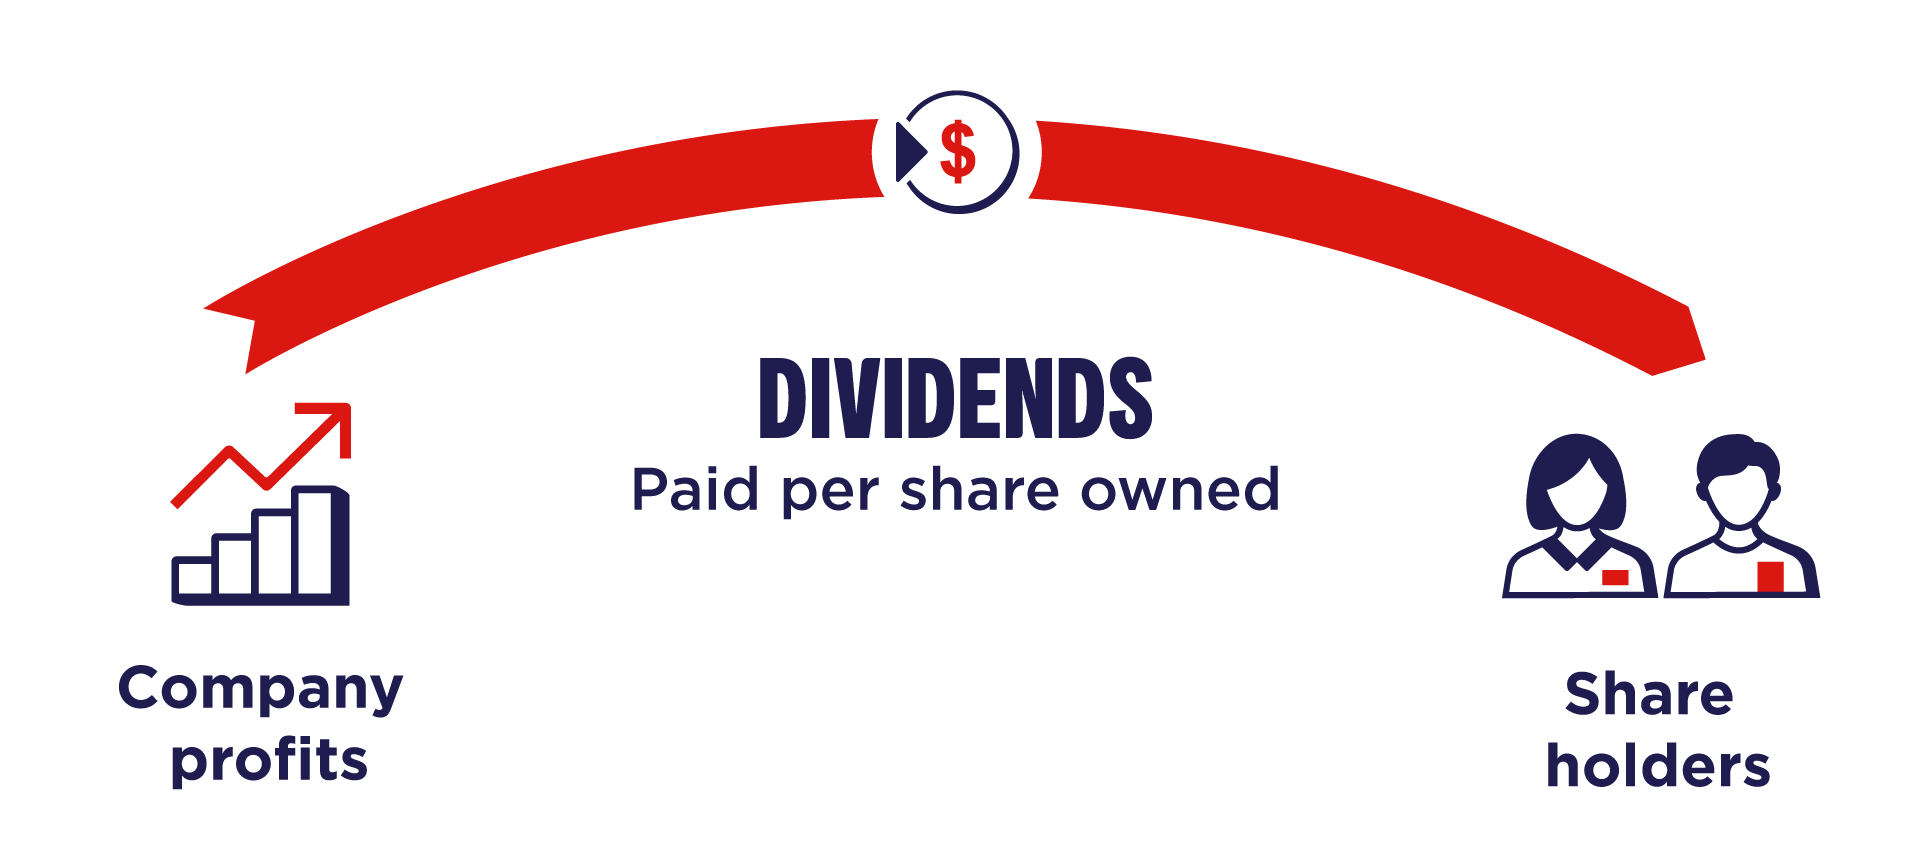 Dividends are a portion of company profits divided and paid to shareholders per share owned.